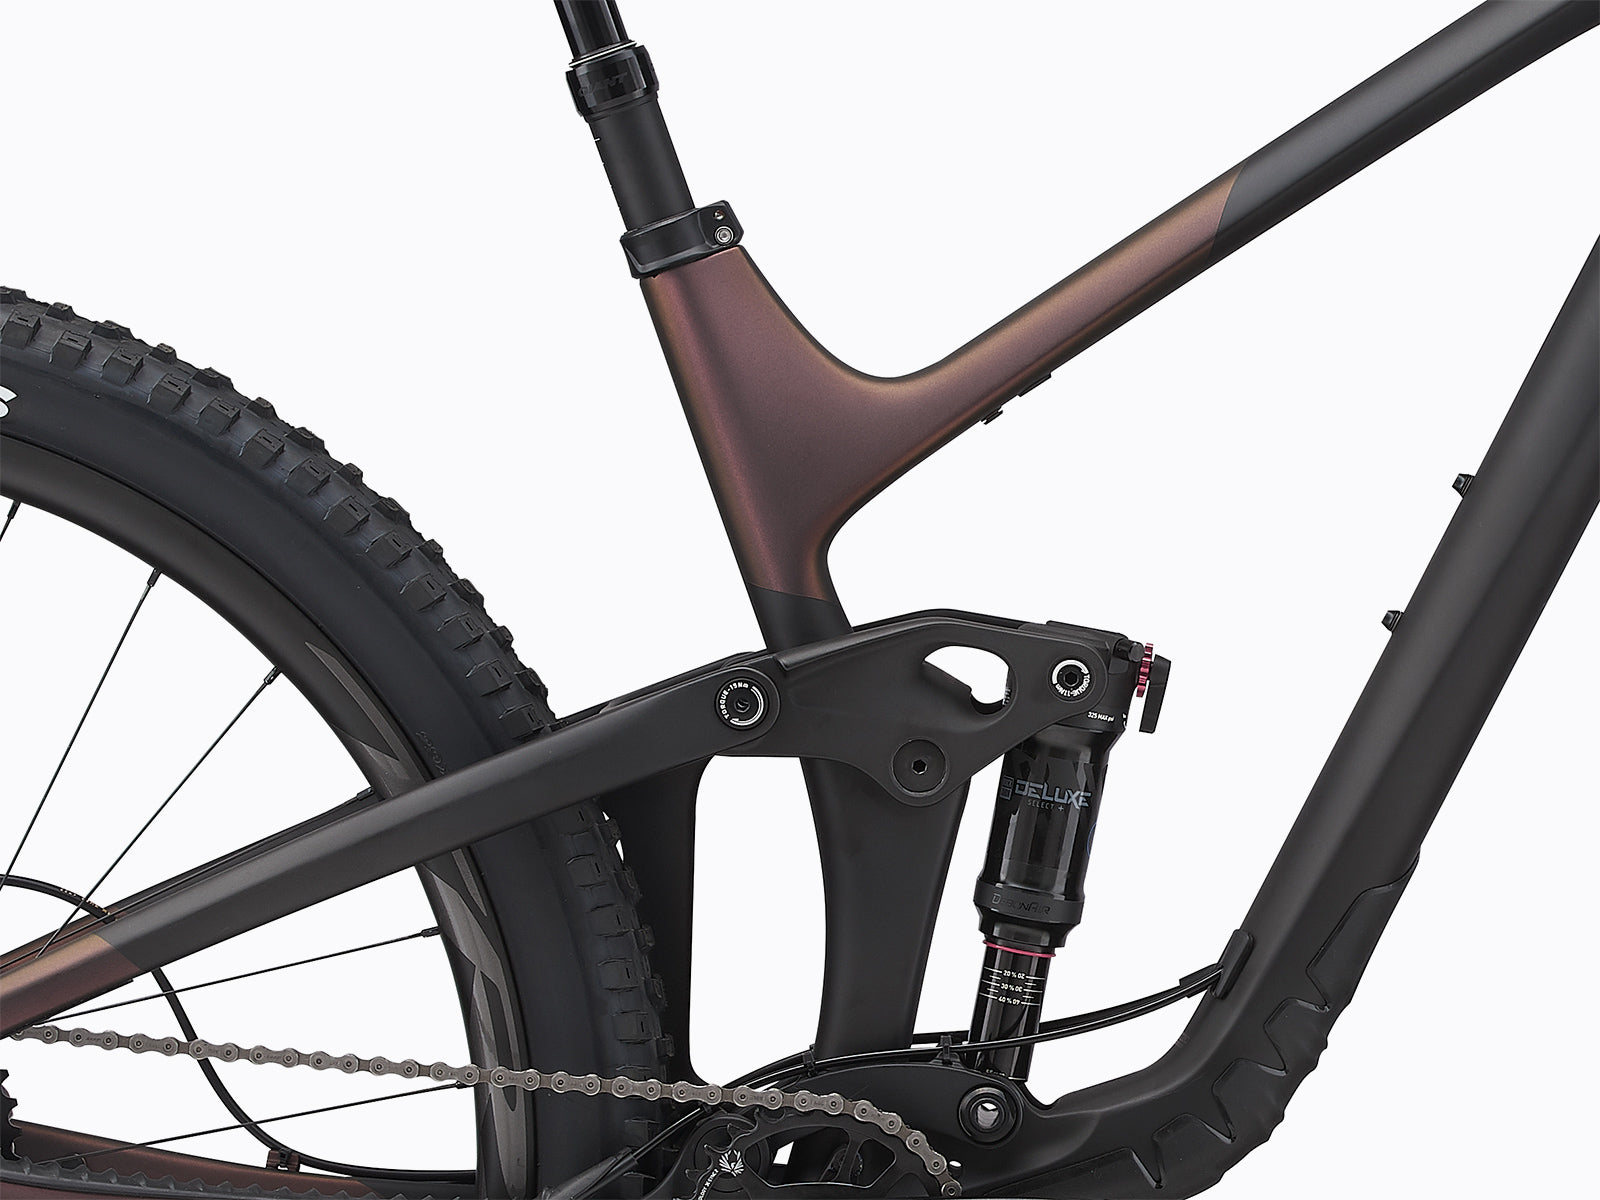 Image features a Giant Trance x advanced Pro 29 2, a mens mountain bike from giants trail bike collection